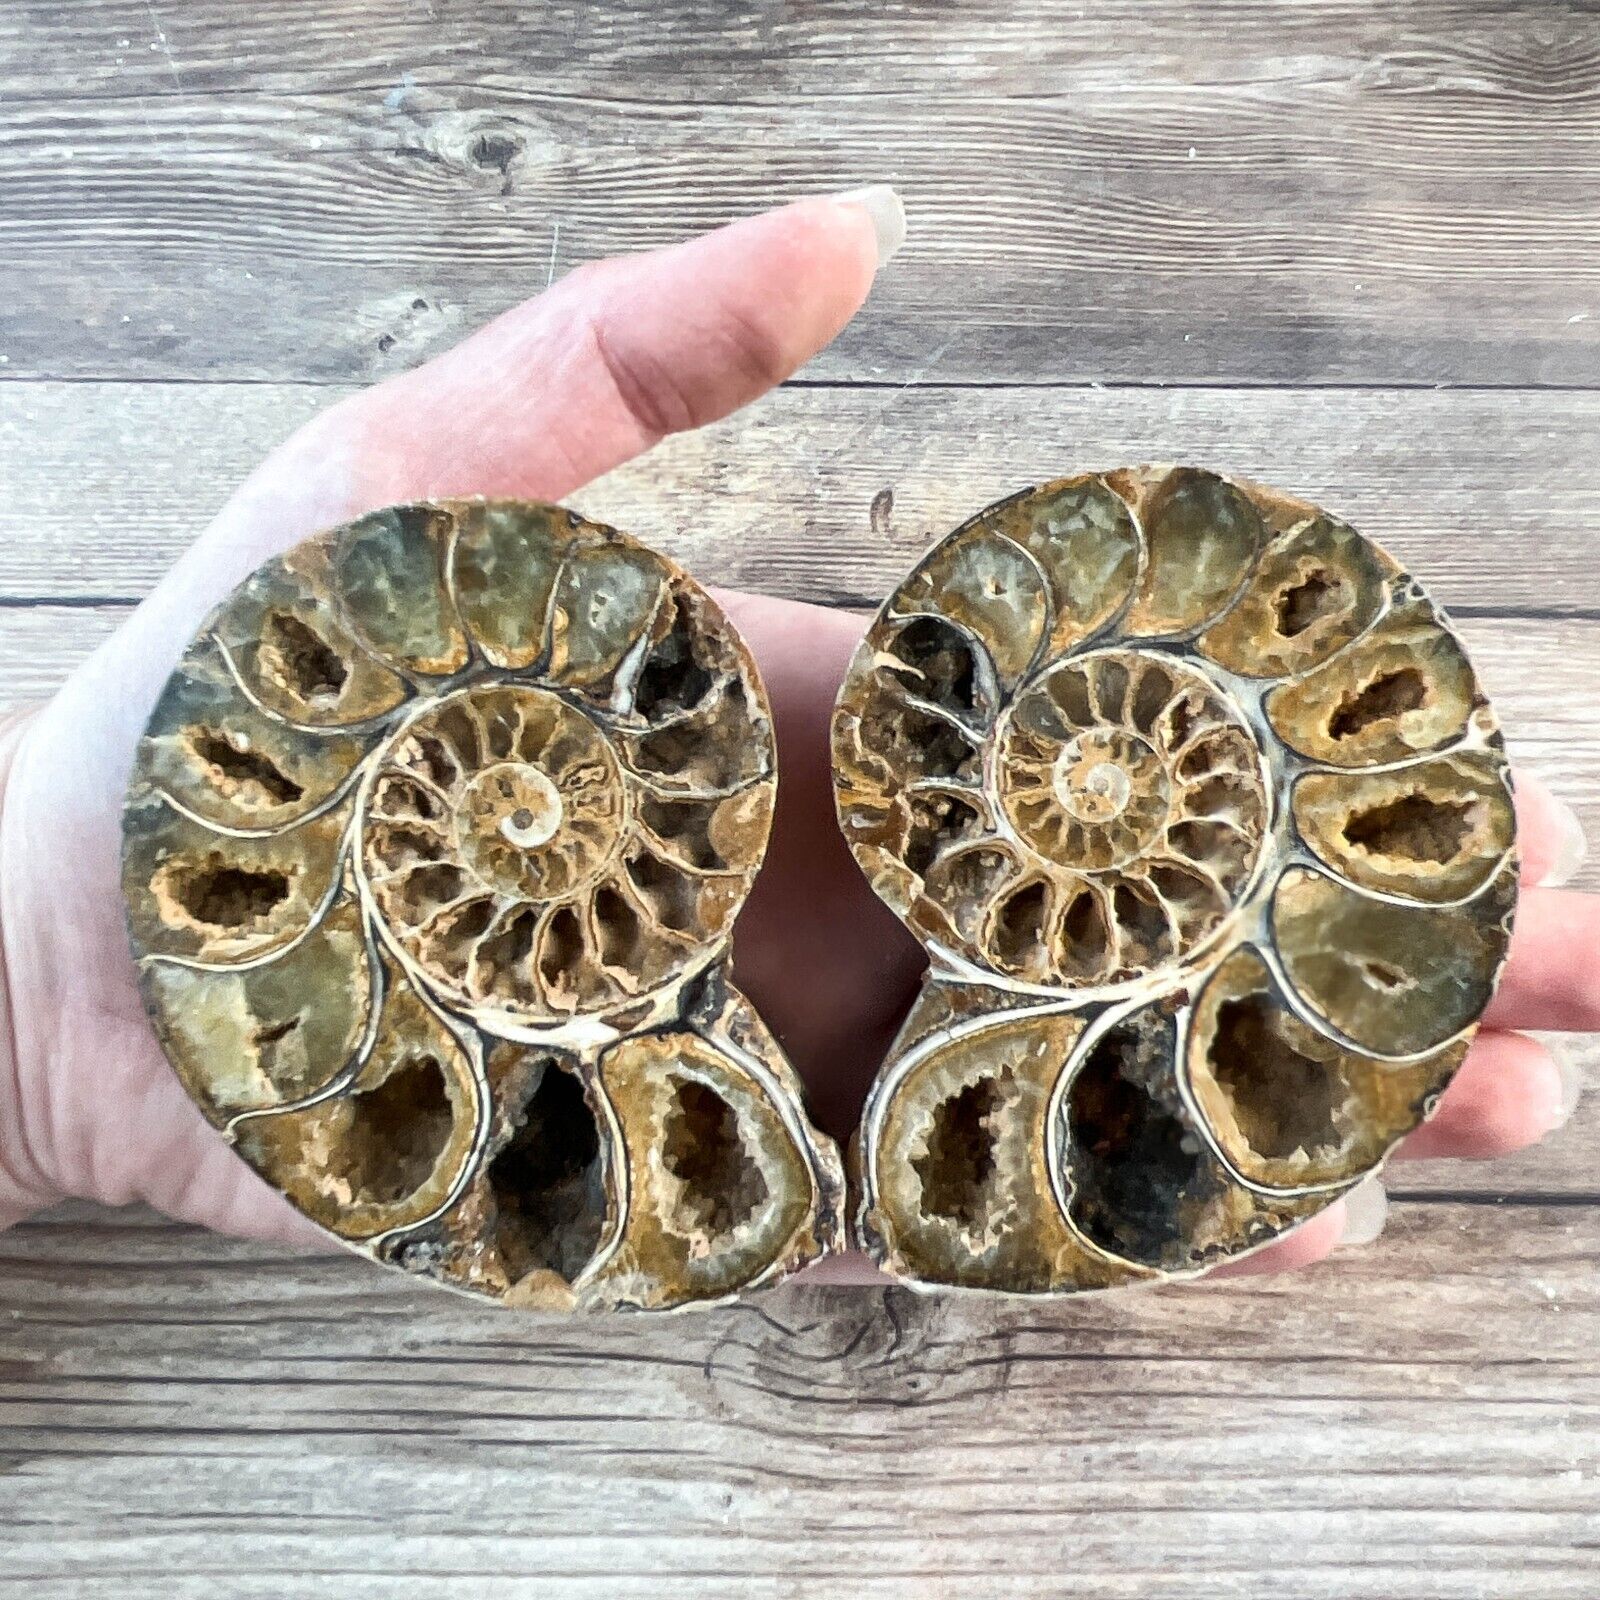 Ammonite Fossil Pair with Calcite Chambers 166g, Polished